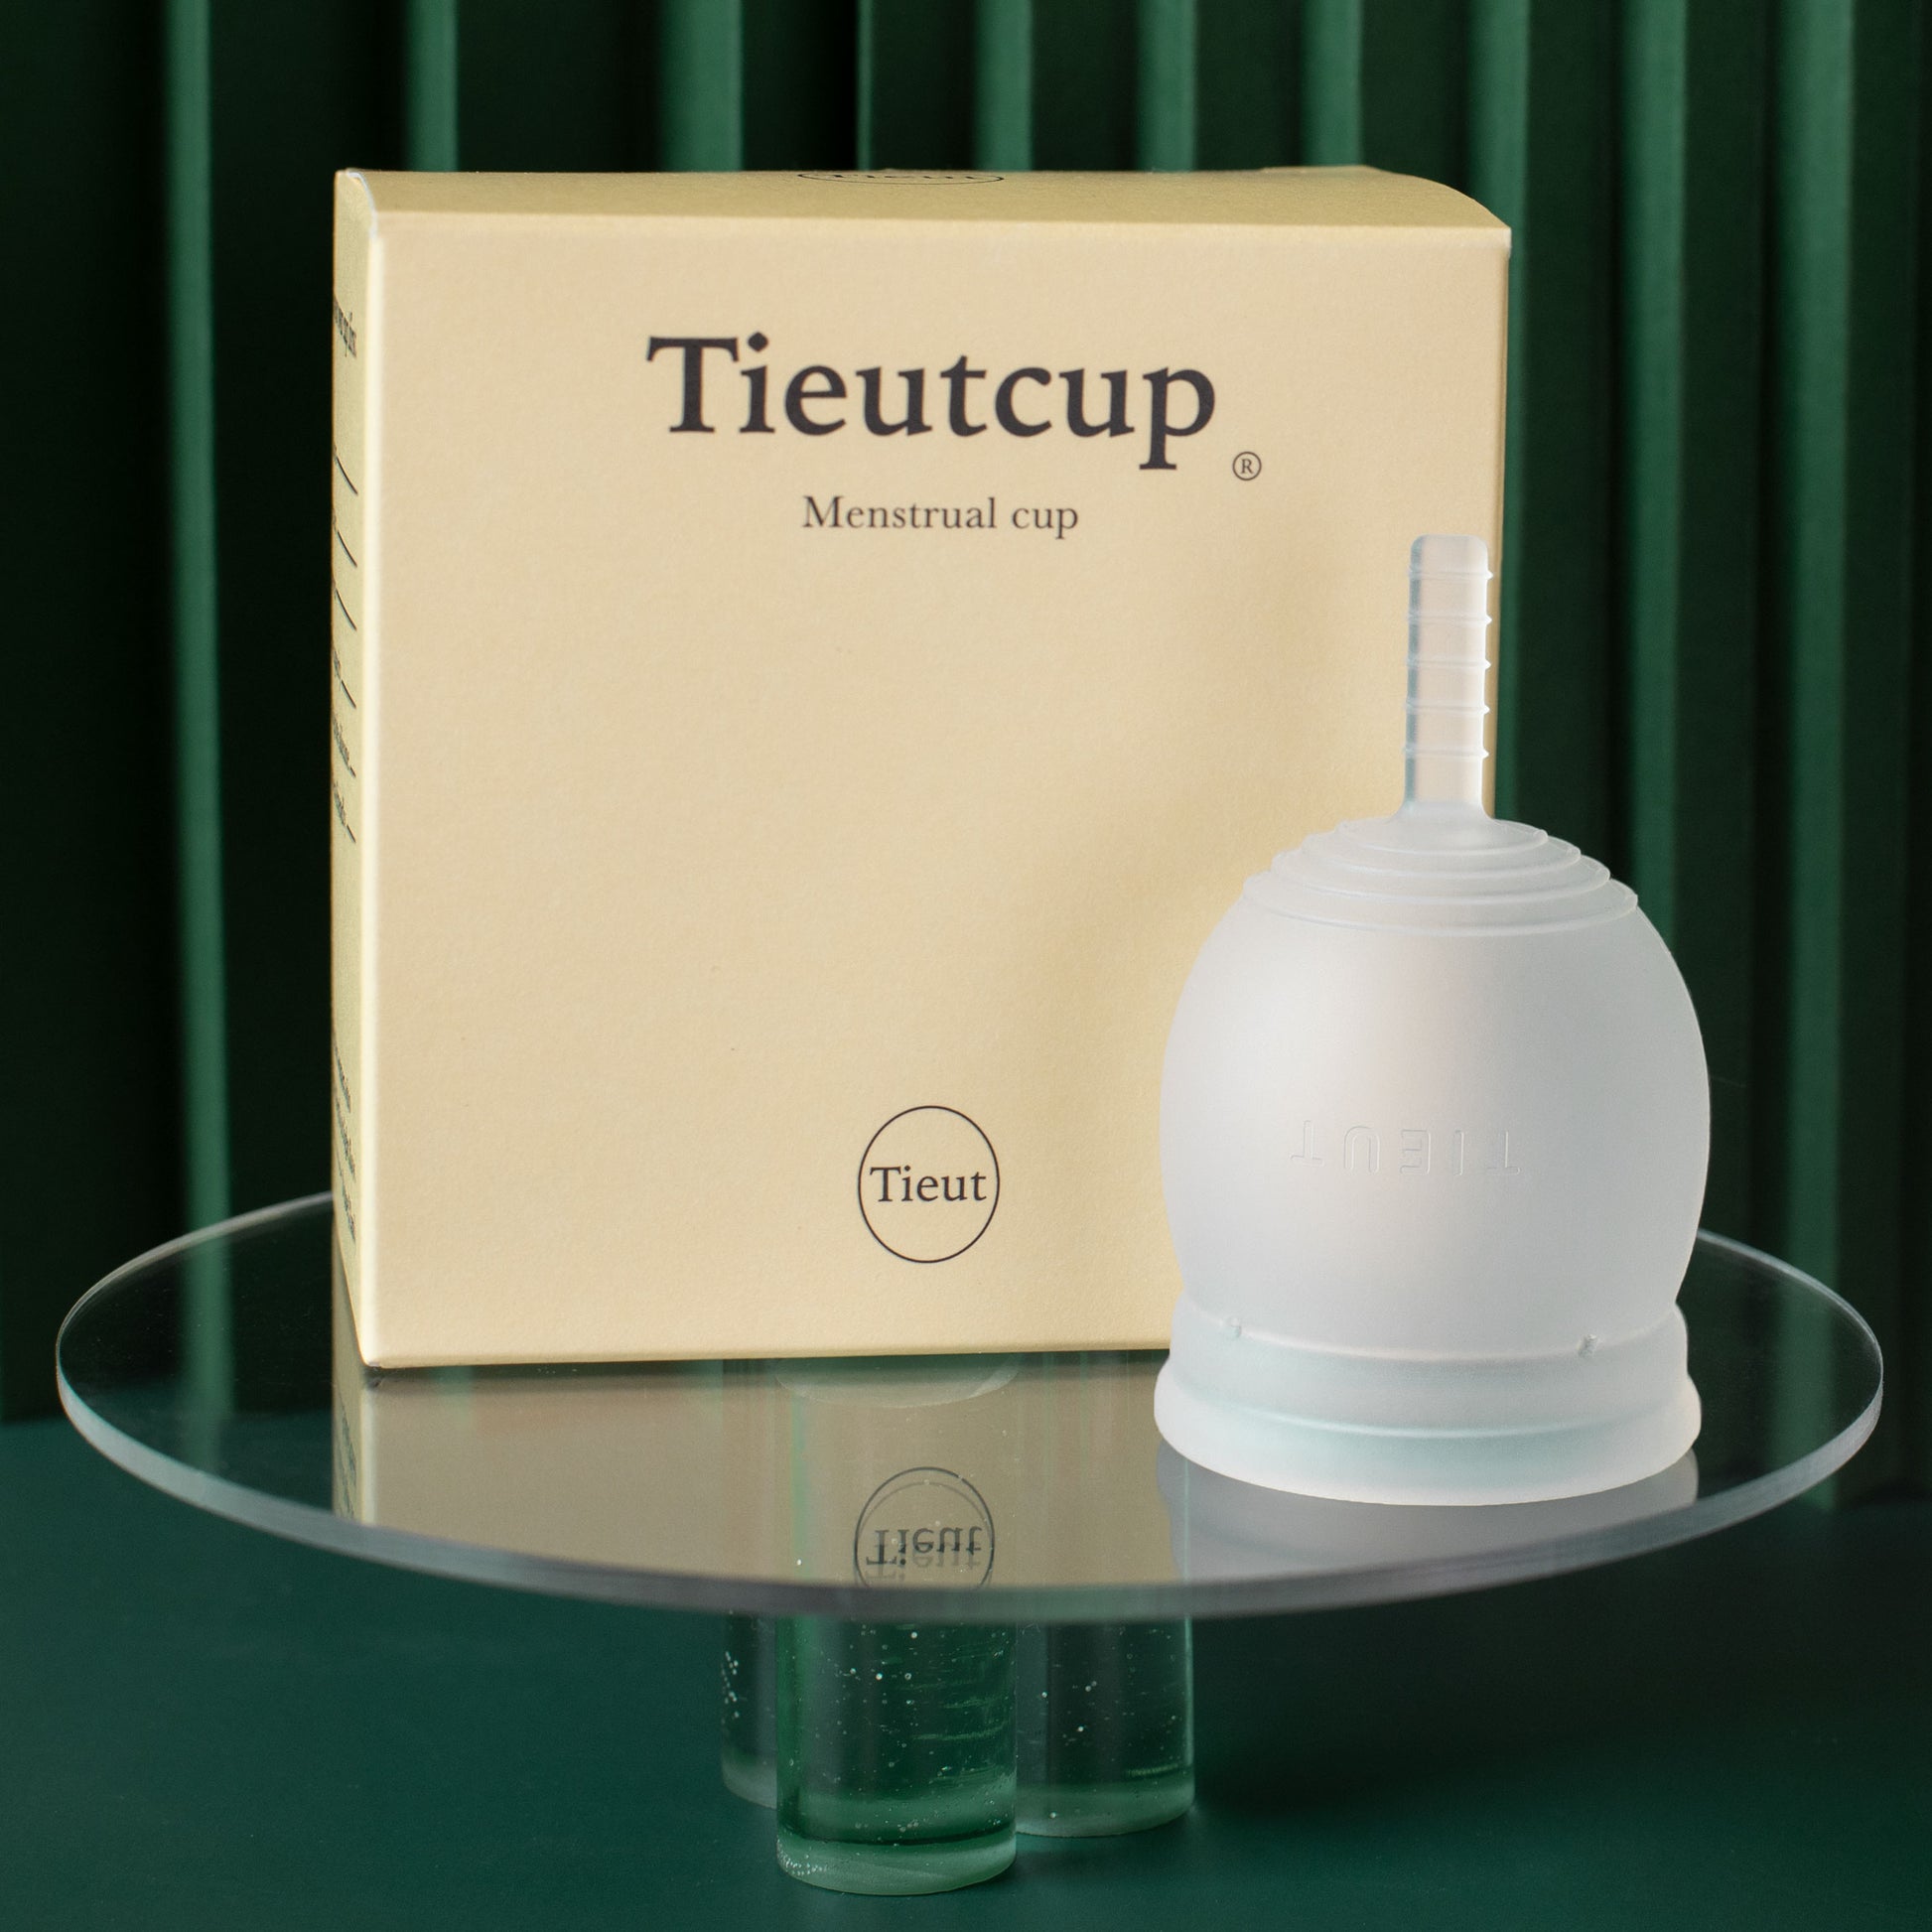 Tieutcup high capacity menstrual cup for heavy flow in large